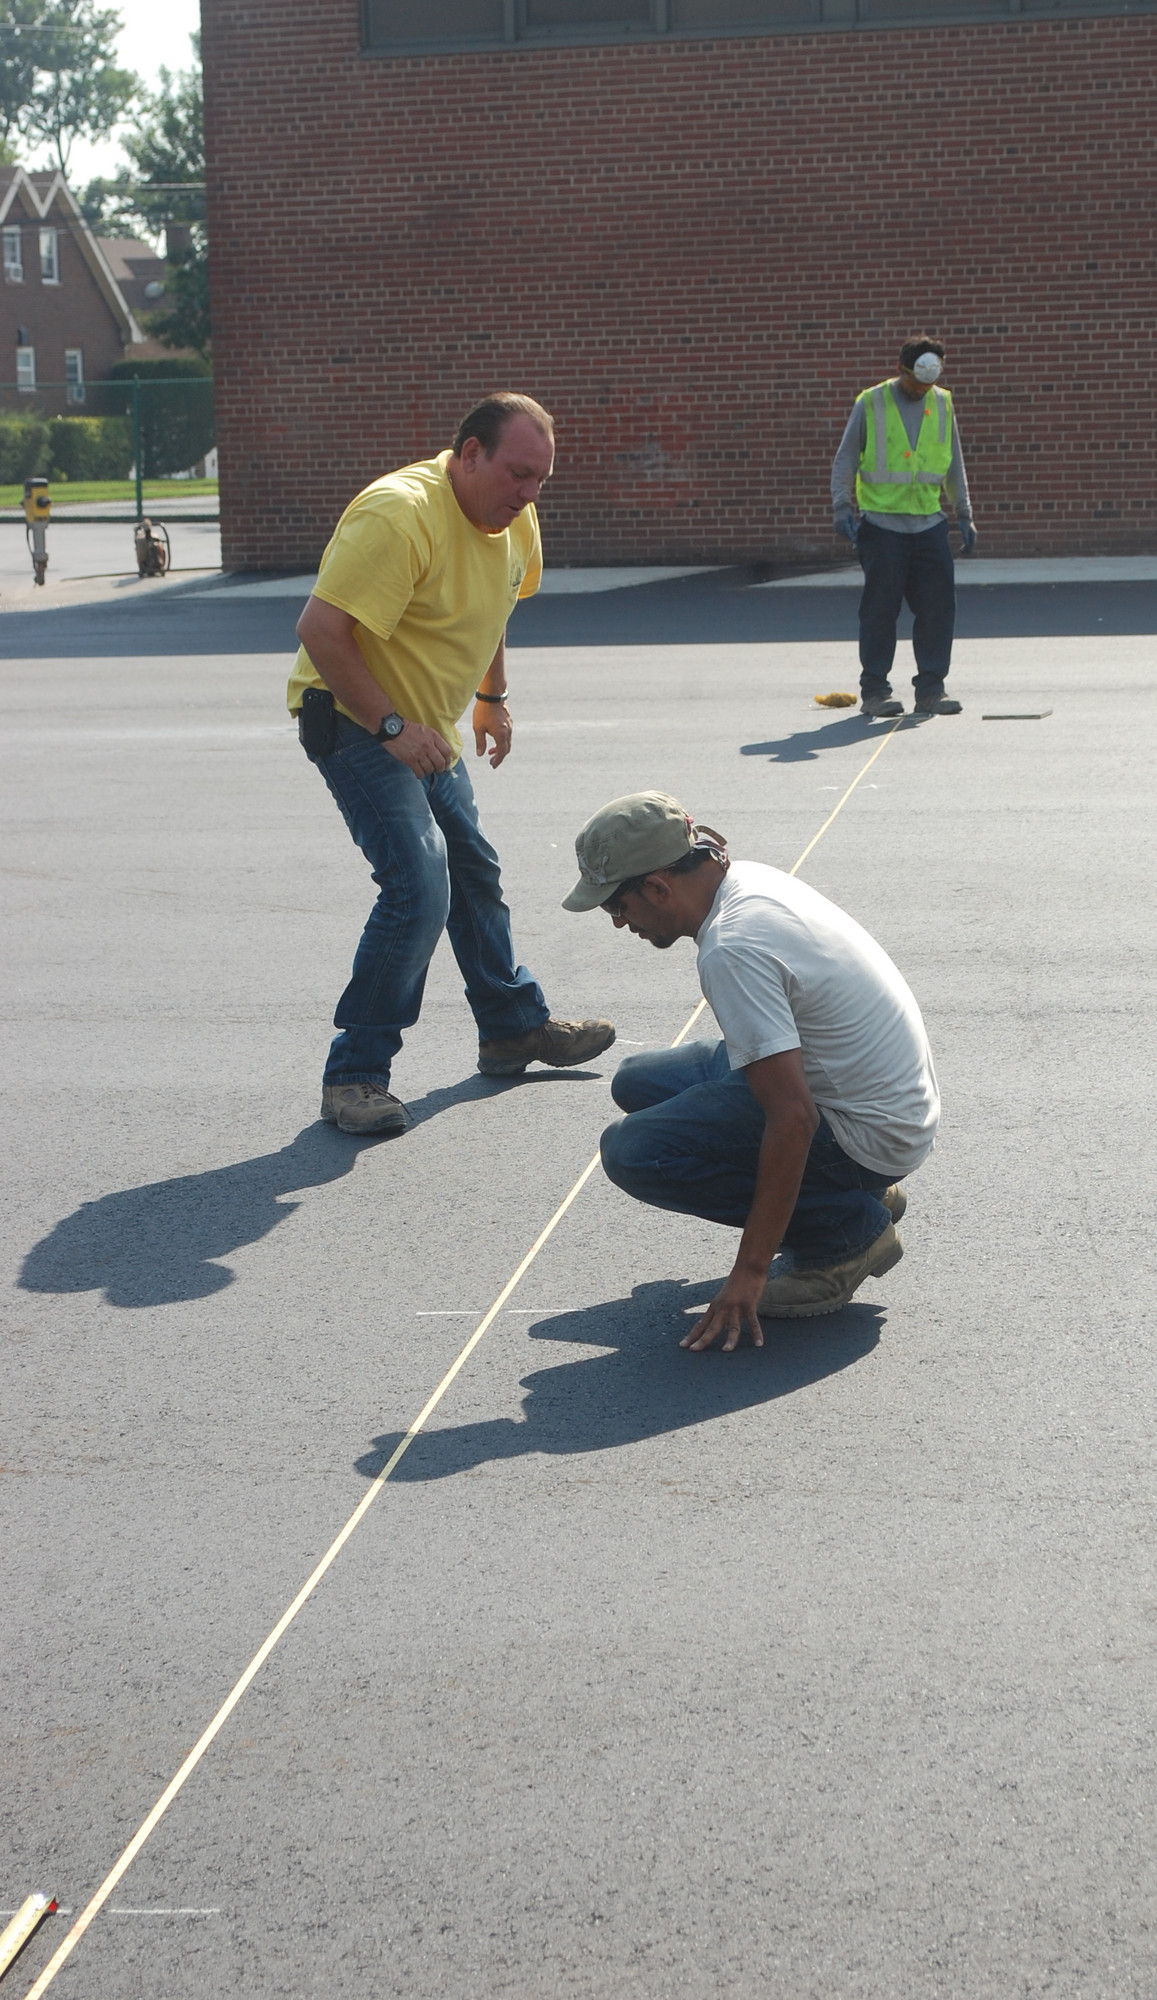 Workers measure for the new fence that will be installed between the parking lot and play area at Wheeler Avenue, where the blacktop was just replaced.